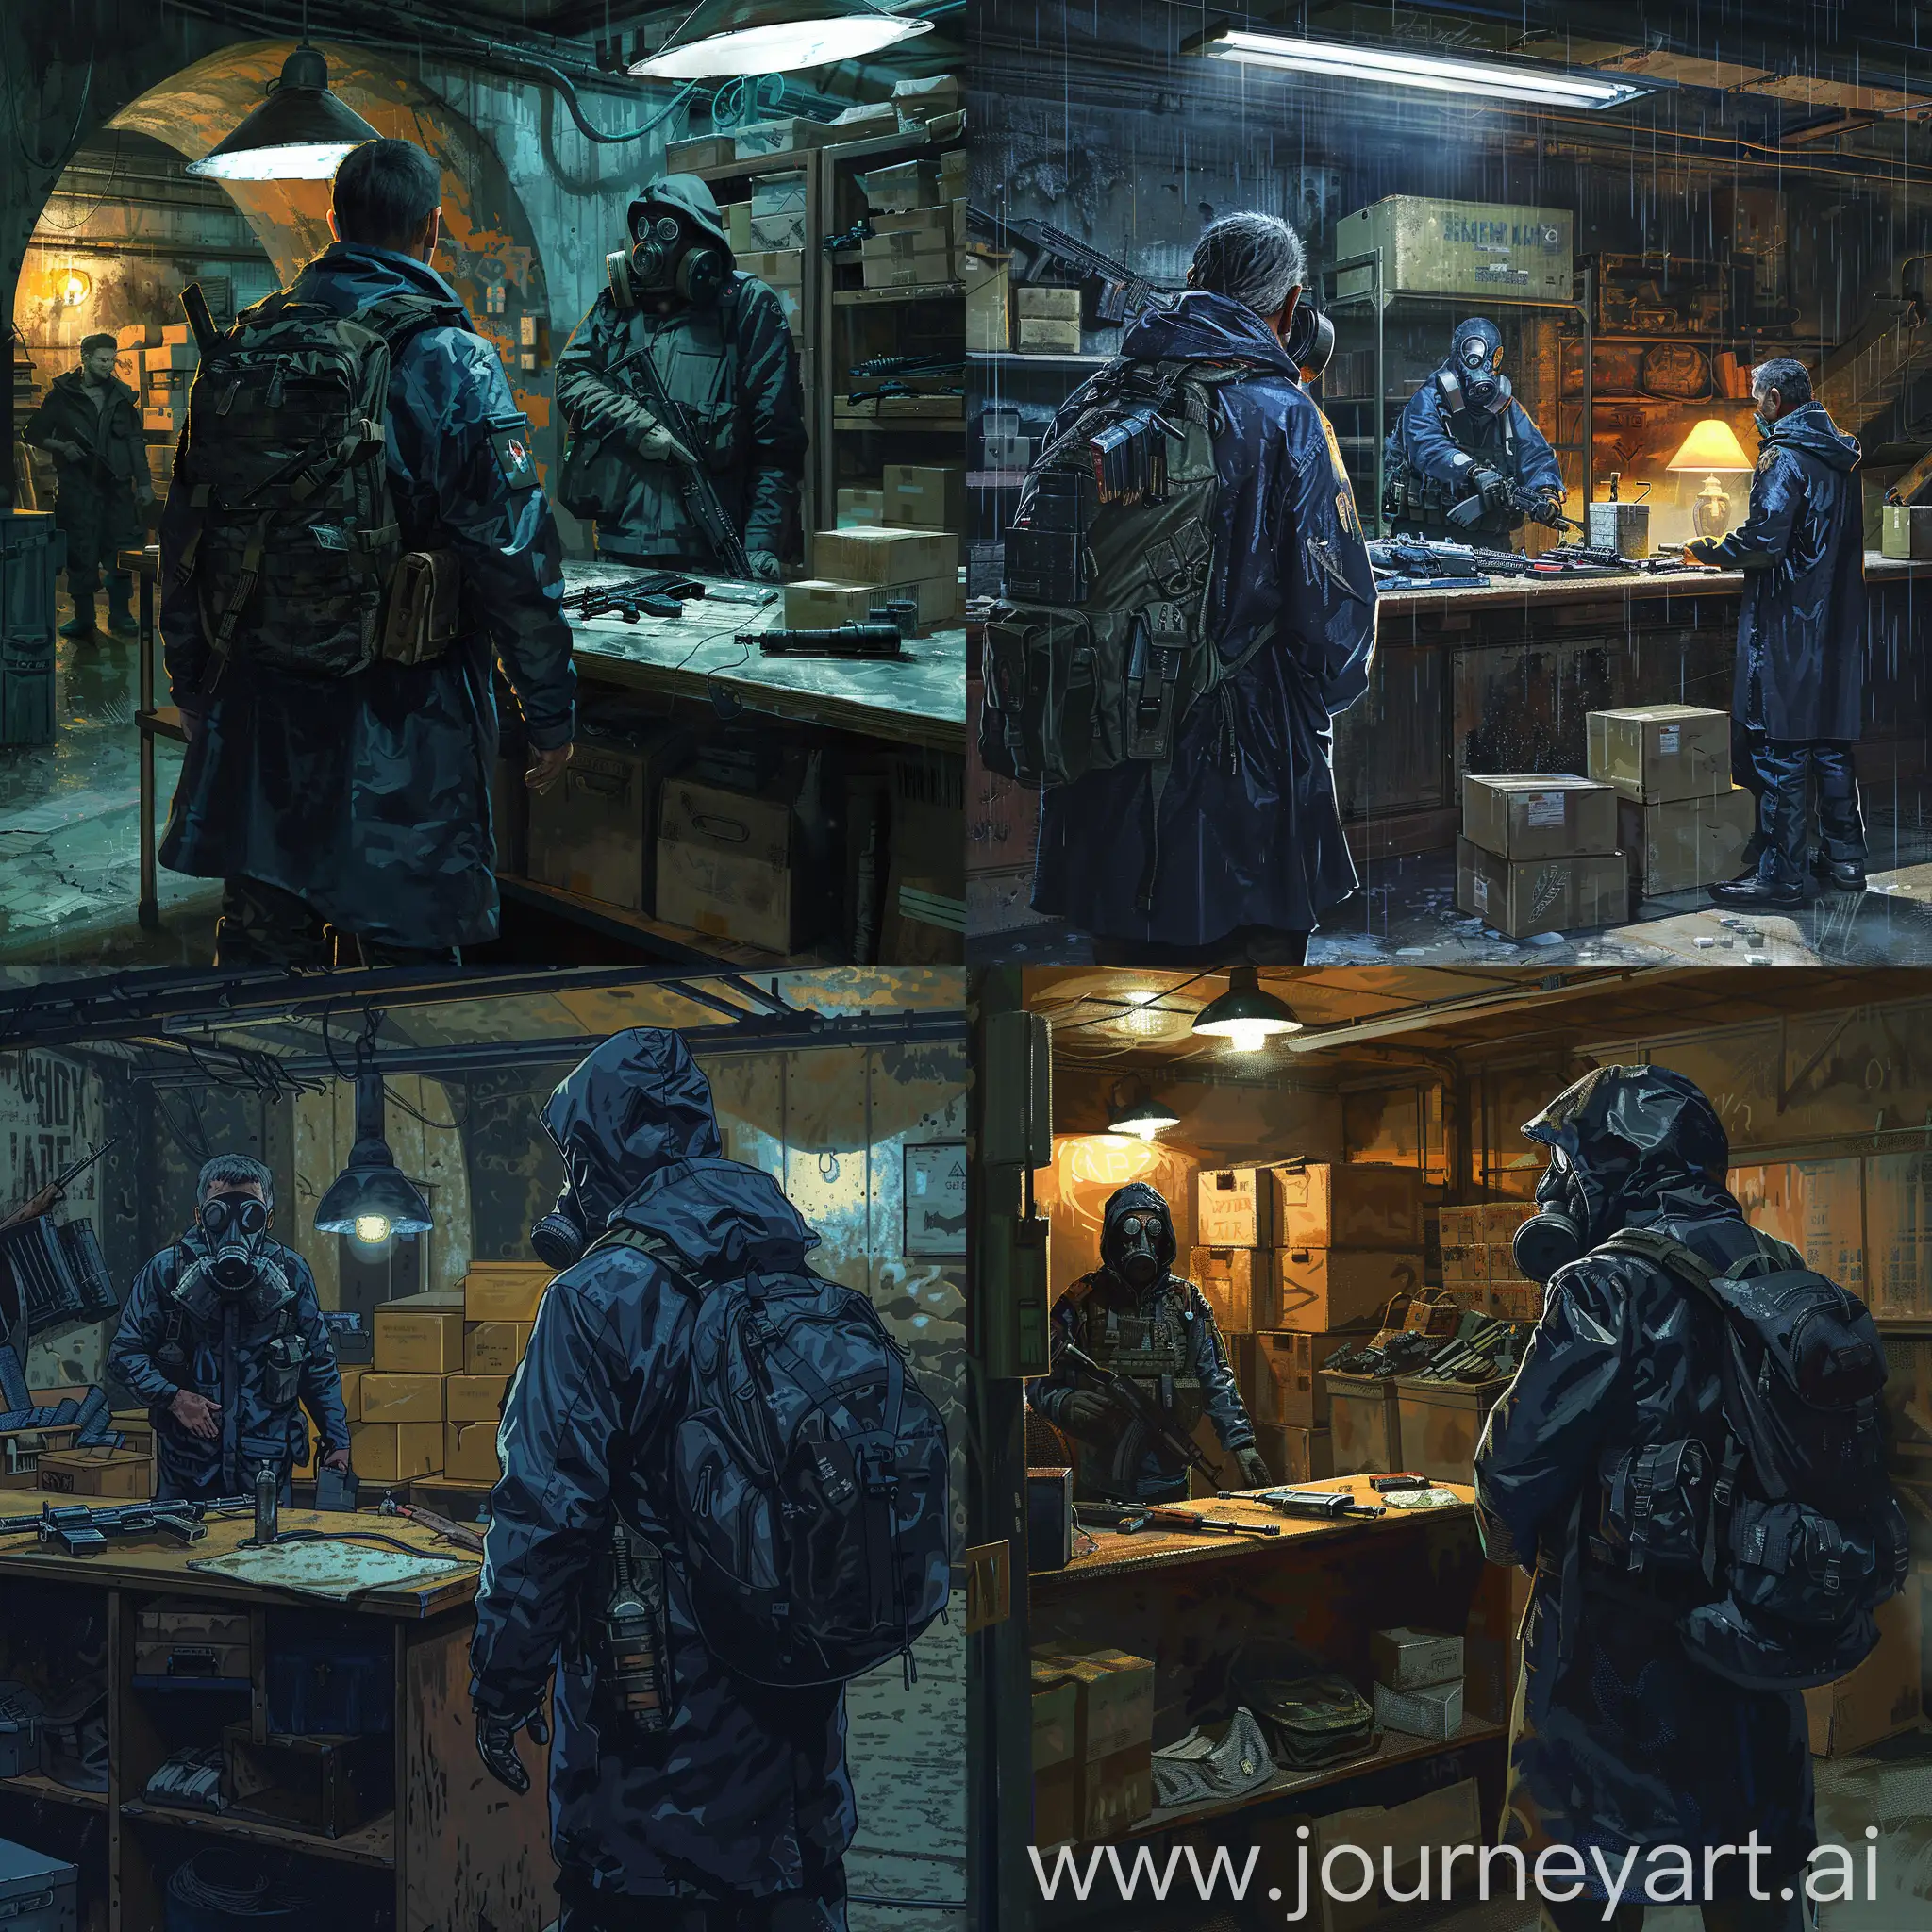 The STALKER universe, a mercenary in a dark blue military raincoat, in military unloading, with a backpack on his back, a gas mask on the mercenary's face, a character stands at an old dealer in weapon and equipment in an underground shelter, boxes and weapons behind the seller's back, a mercenary stands behind the counter, the merchant says something to the mercenary, the room is illuminated one table lamp on the dealer desk.